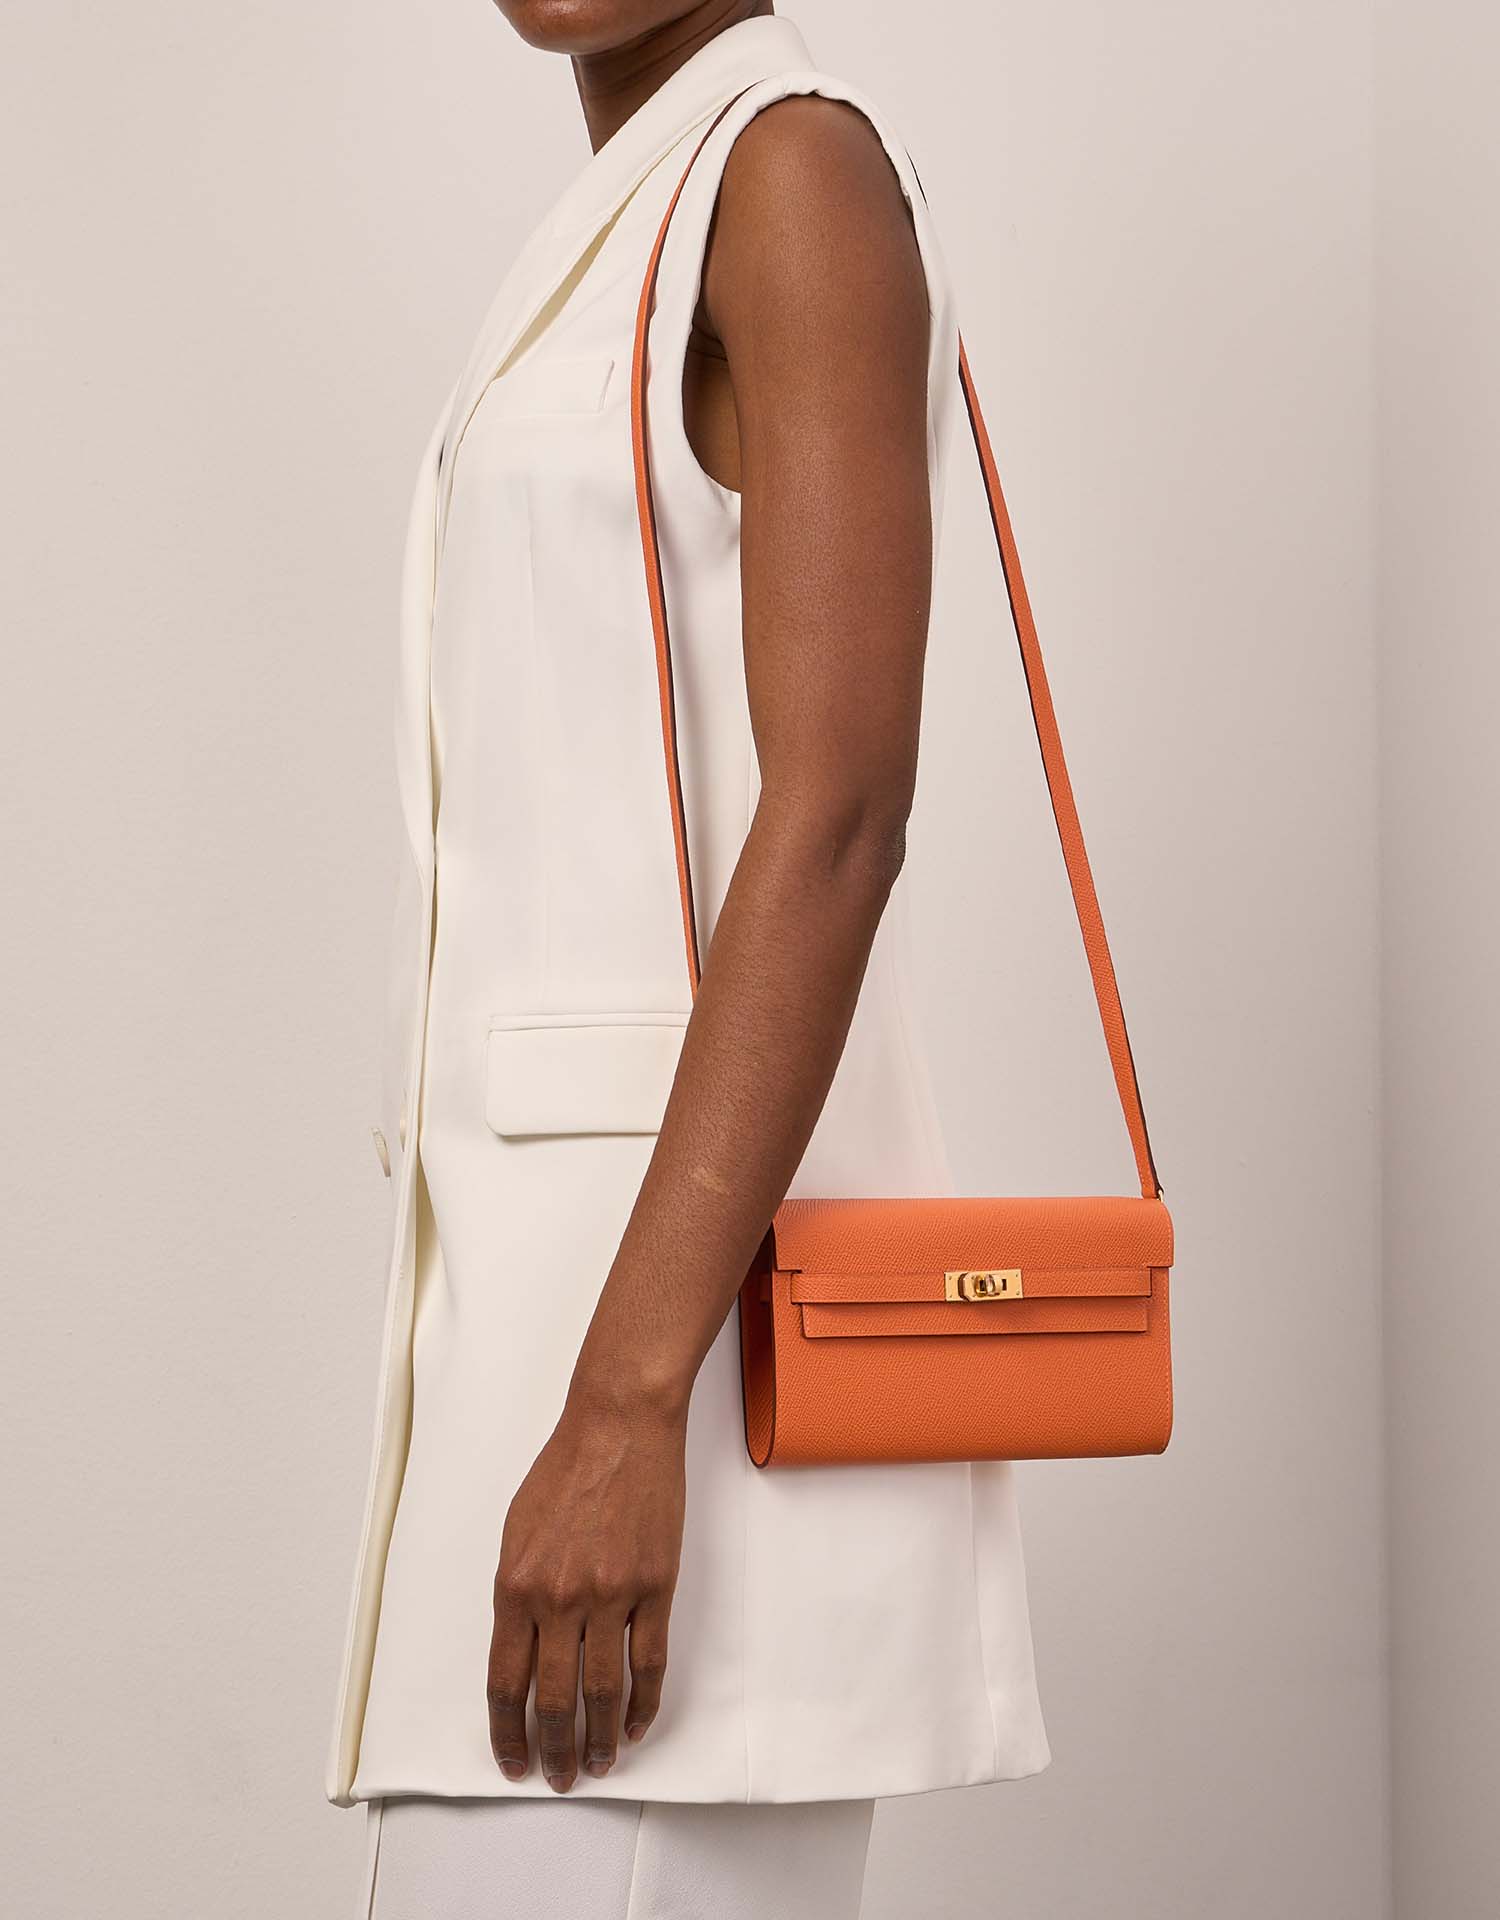 WHAT YOU NEED TO KNOW ABOUT THE HERMES KELLY TO GO 